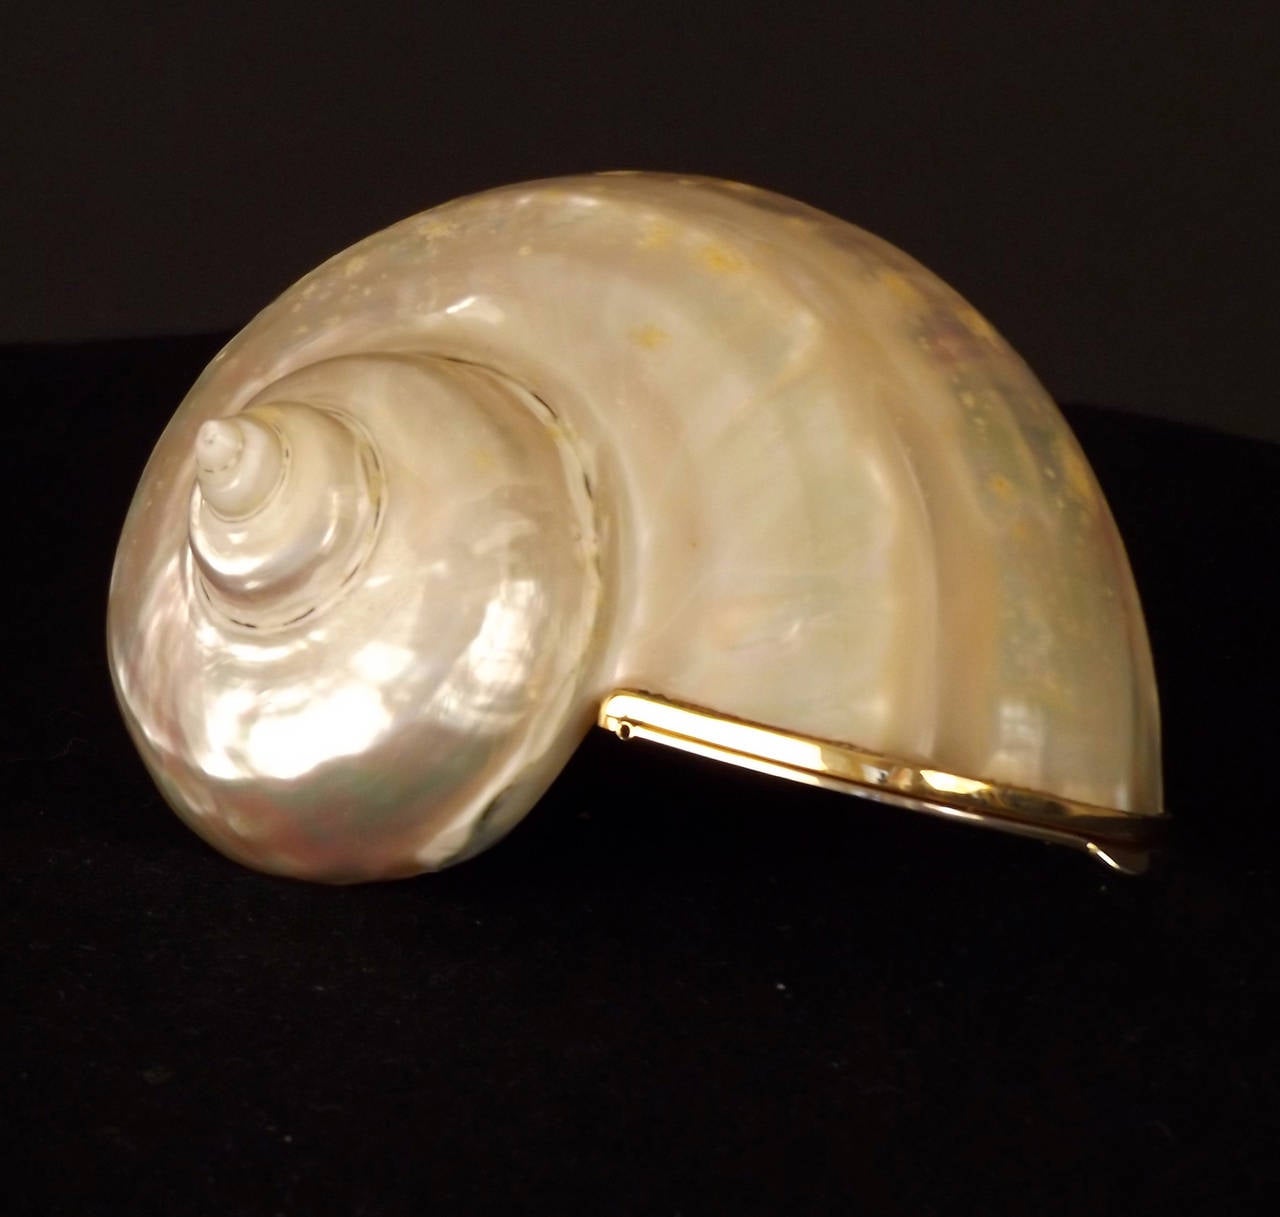 This amazing evening clutch either dates to the late 1970s or the early 1980s. My research has found both, so I'm not sure which is correct. The shell clutch is made from a real seashell with an attached gold top and hinged flap. A very rare piece